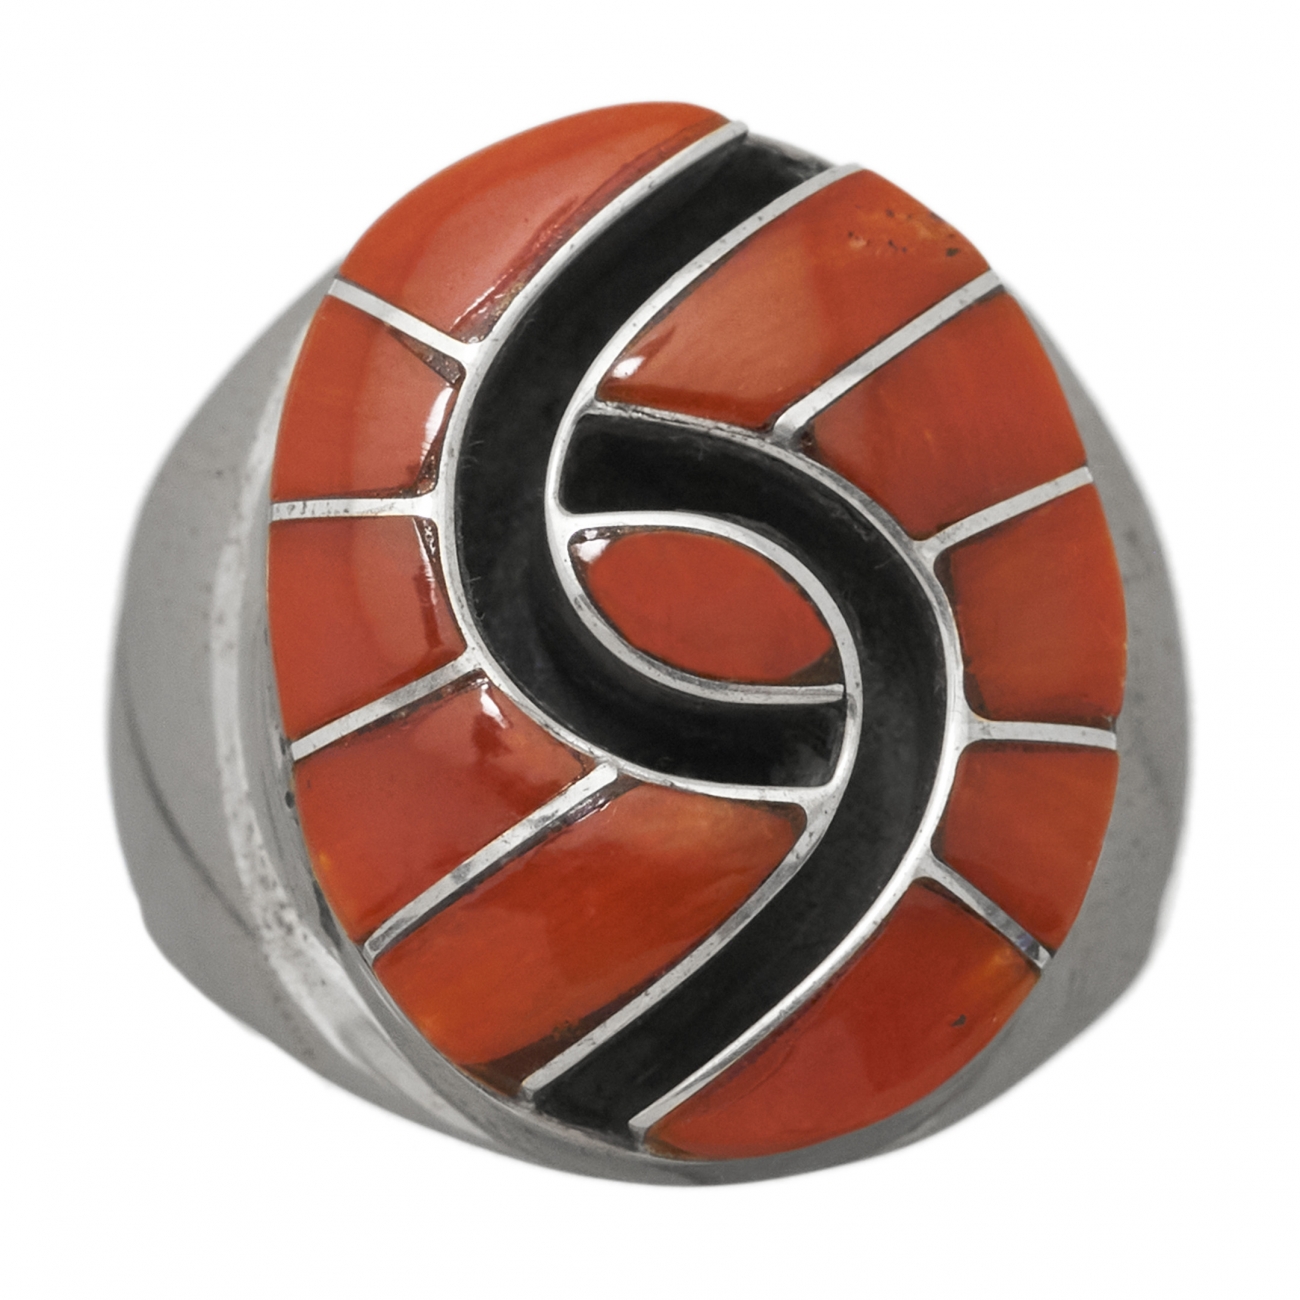 Harpo Paris ring BA1065 in coral and sterling silver